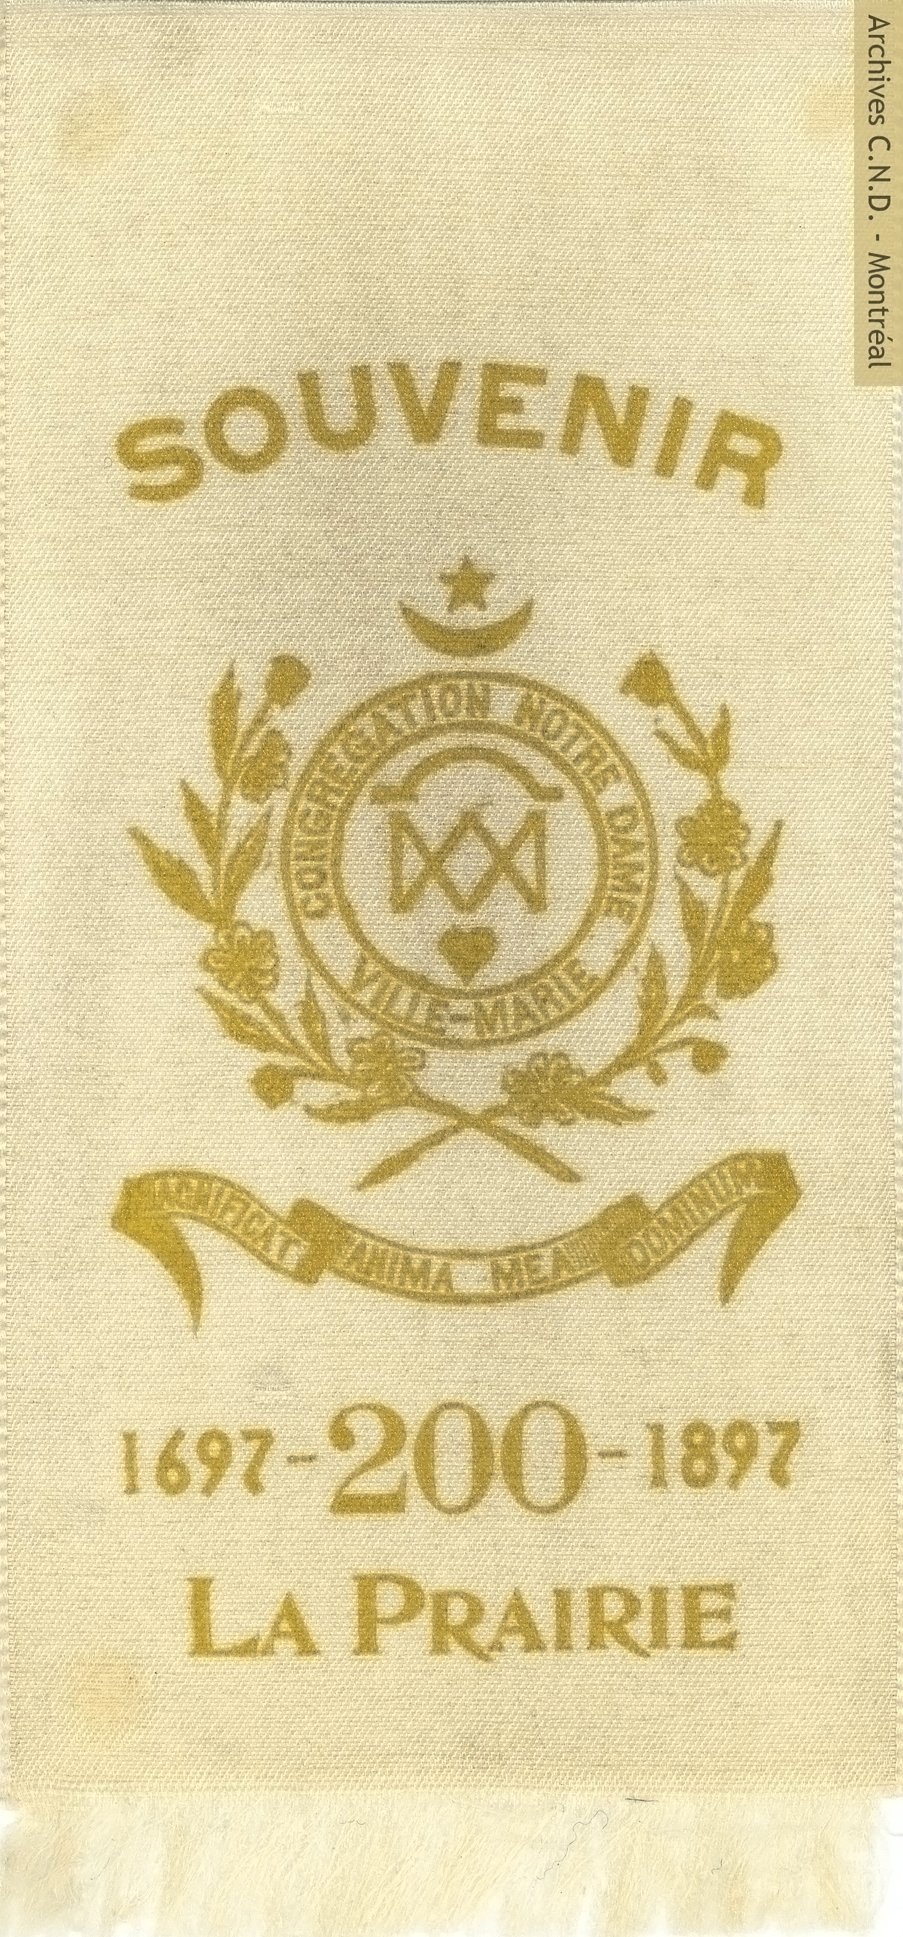 Souvenir ribbon of the 200th anniversary of the foundation of the convent